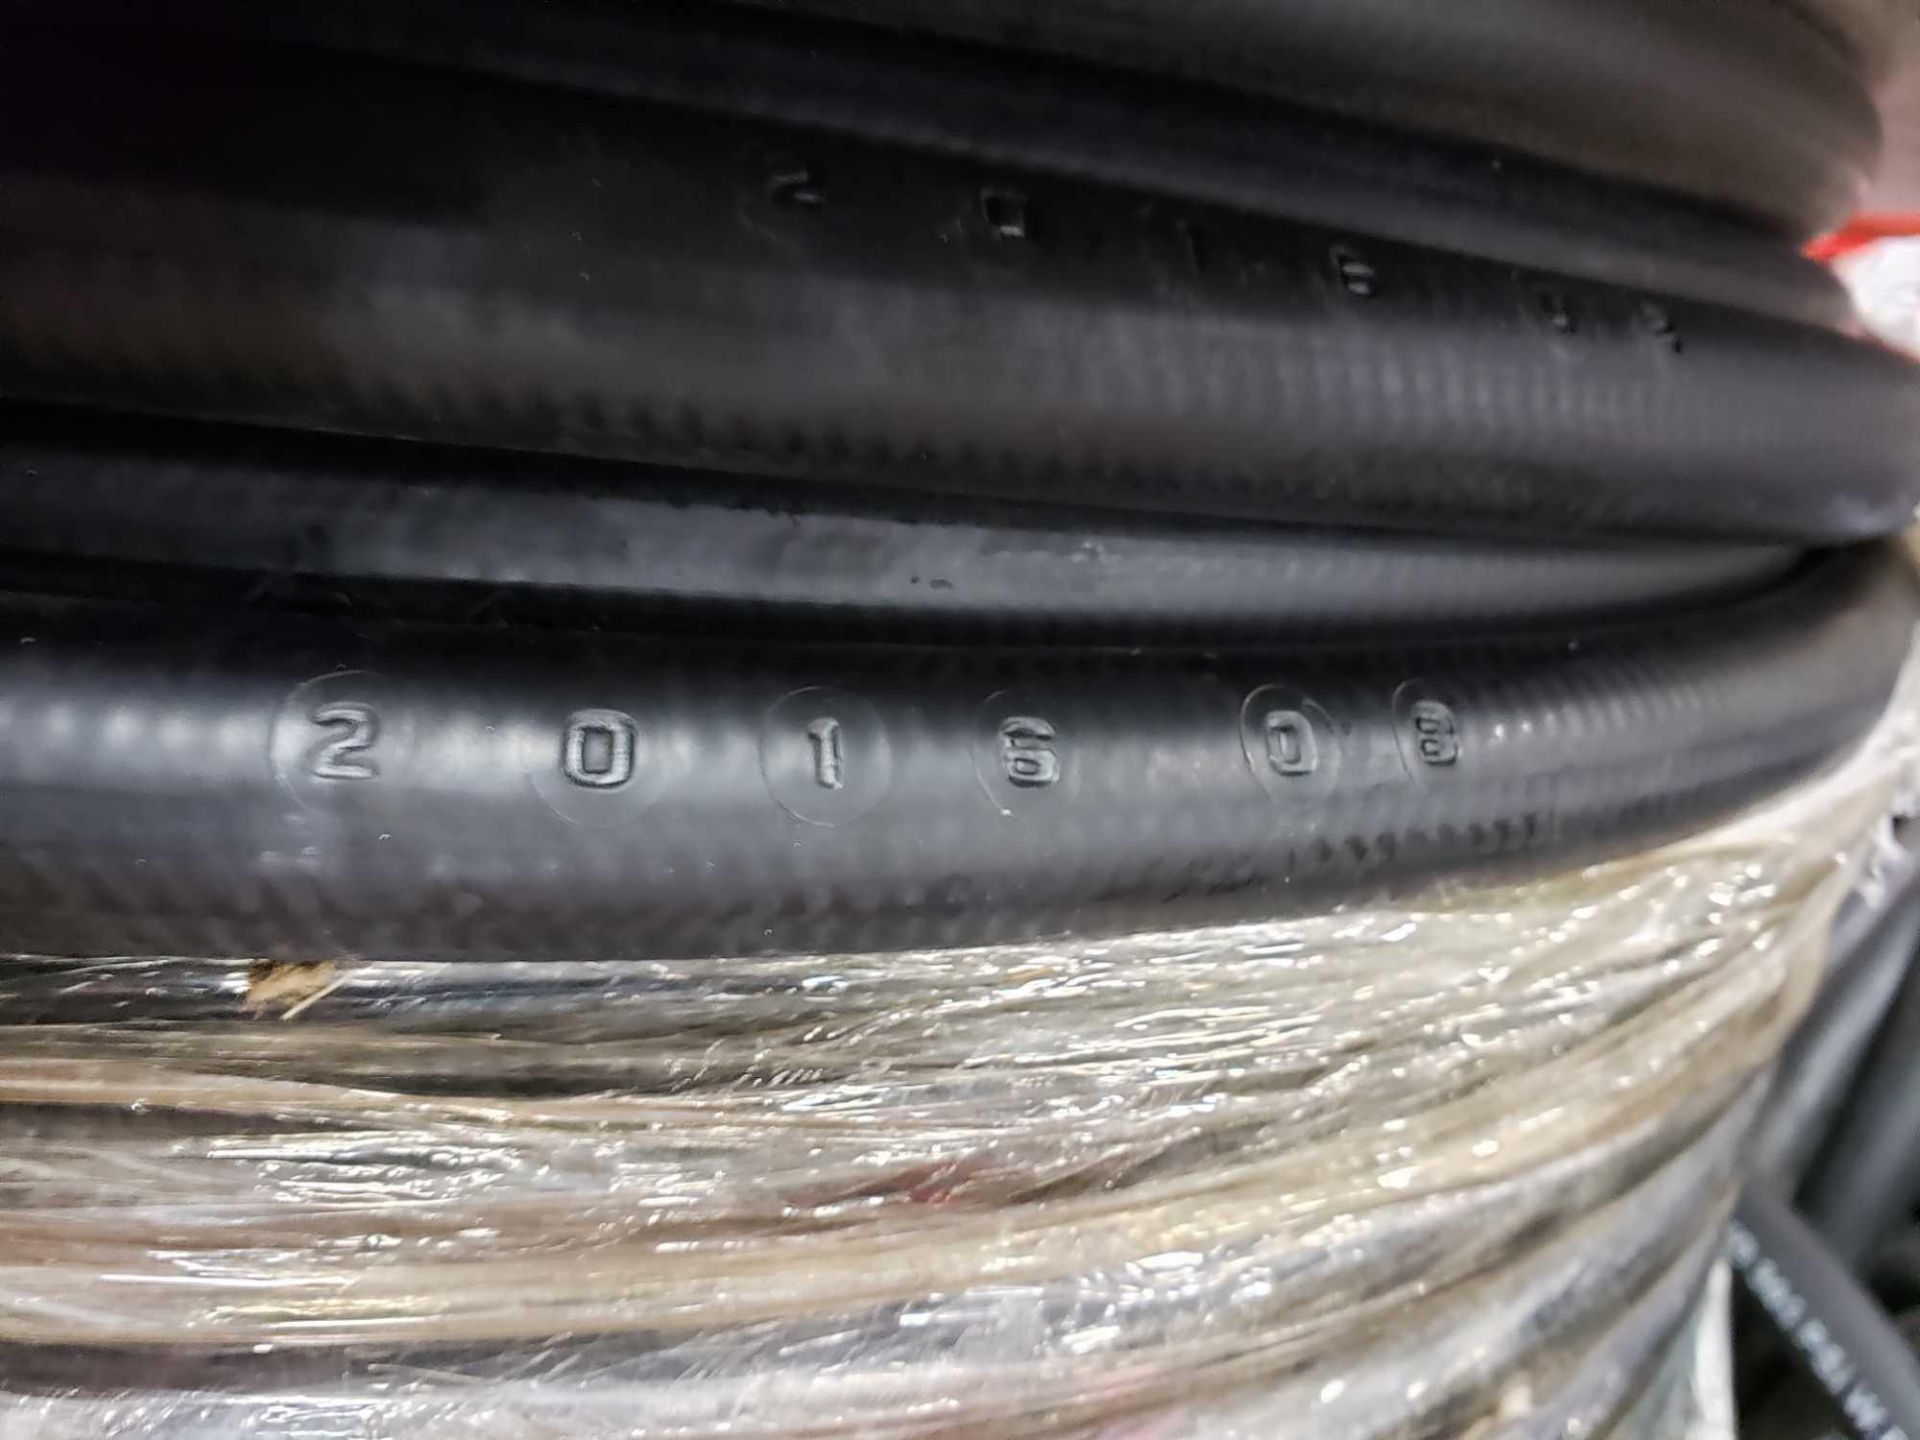 600ft air and water hose size 1/2"x21mm/1B. New as pictured. - Image 4 of 4